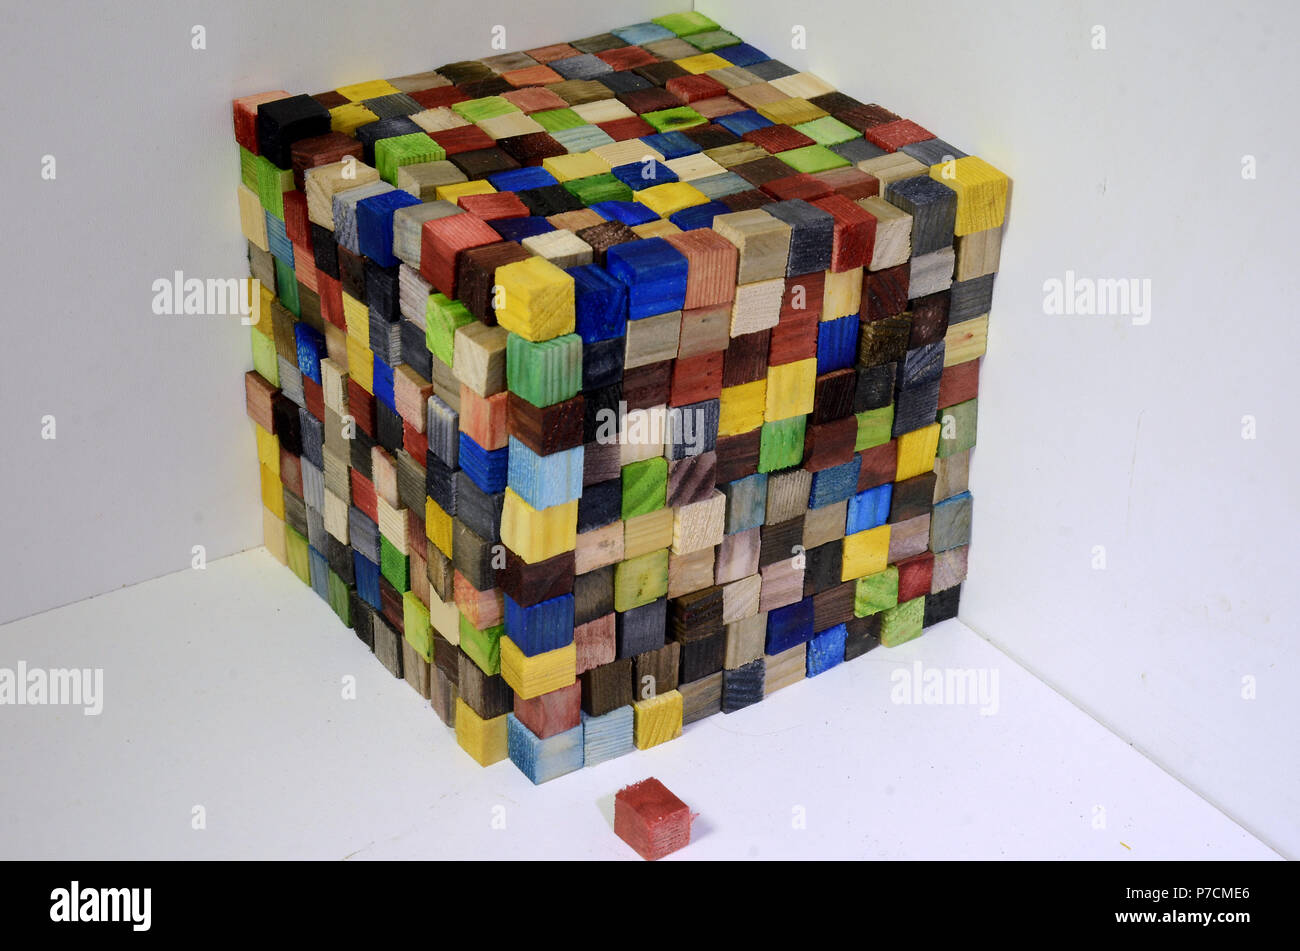 A cube made of colorful wood cubes, each cube is 1x1x1 centimeter, the wole cube consists of 1000 of such cubess, thus its volumen is 1000 cm^3 or one Stock Photo